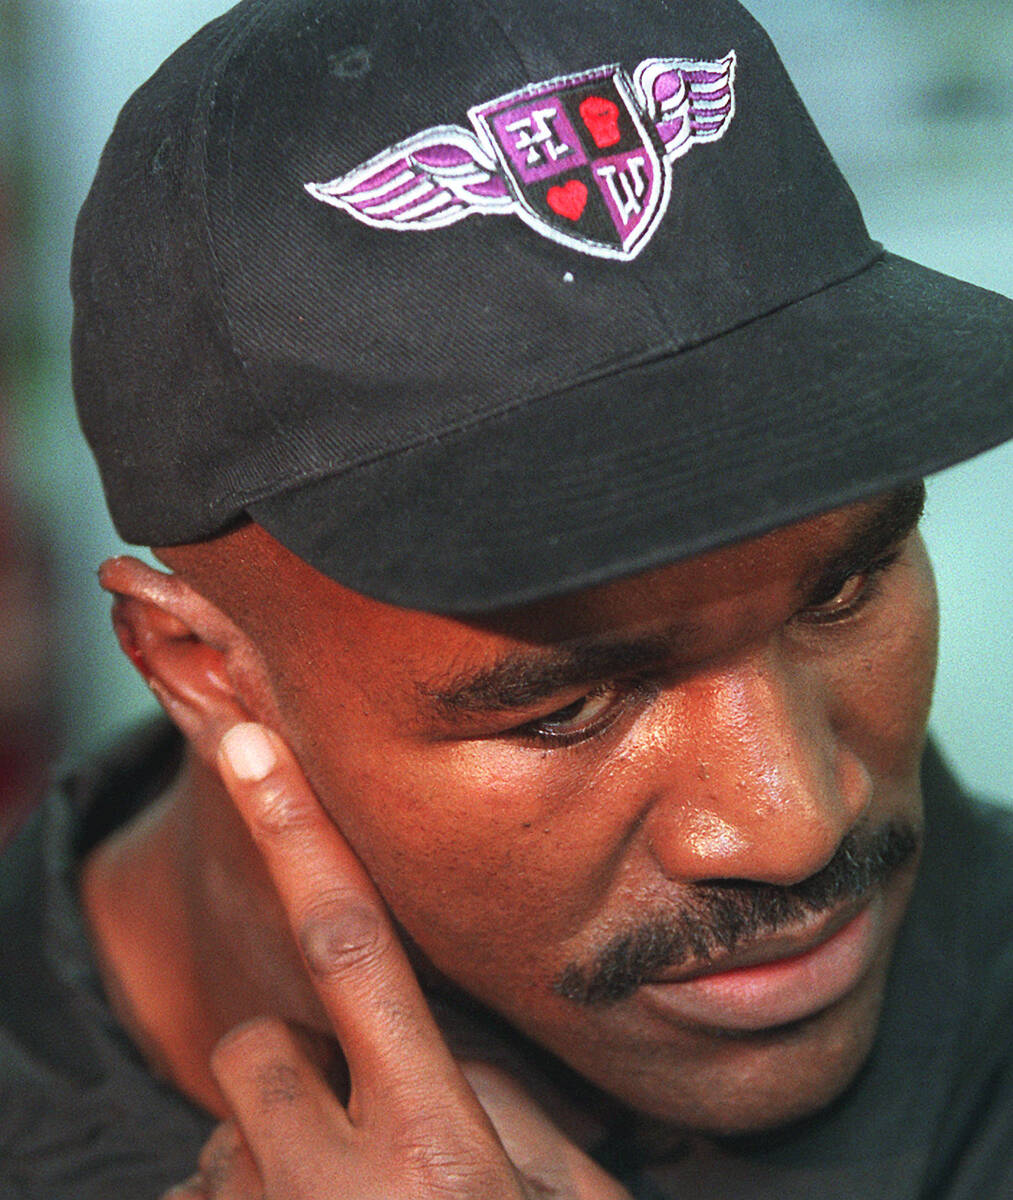 Following medical treatment at Valley Hospital, Evander Holyfield describes the biting injuries ...